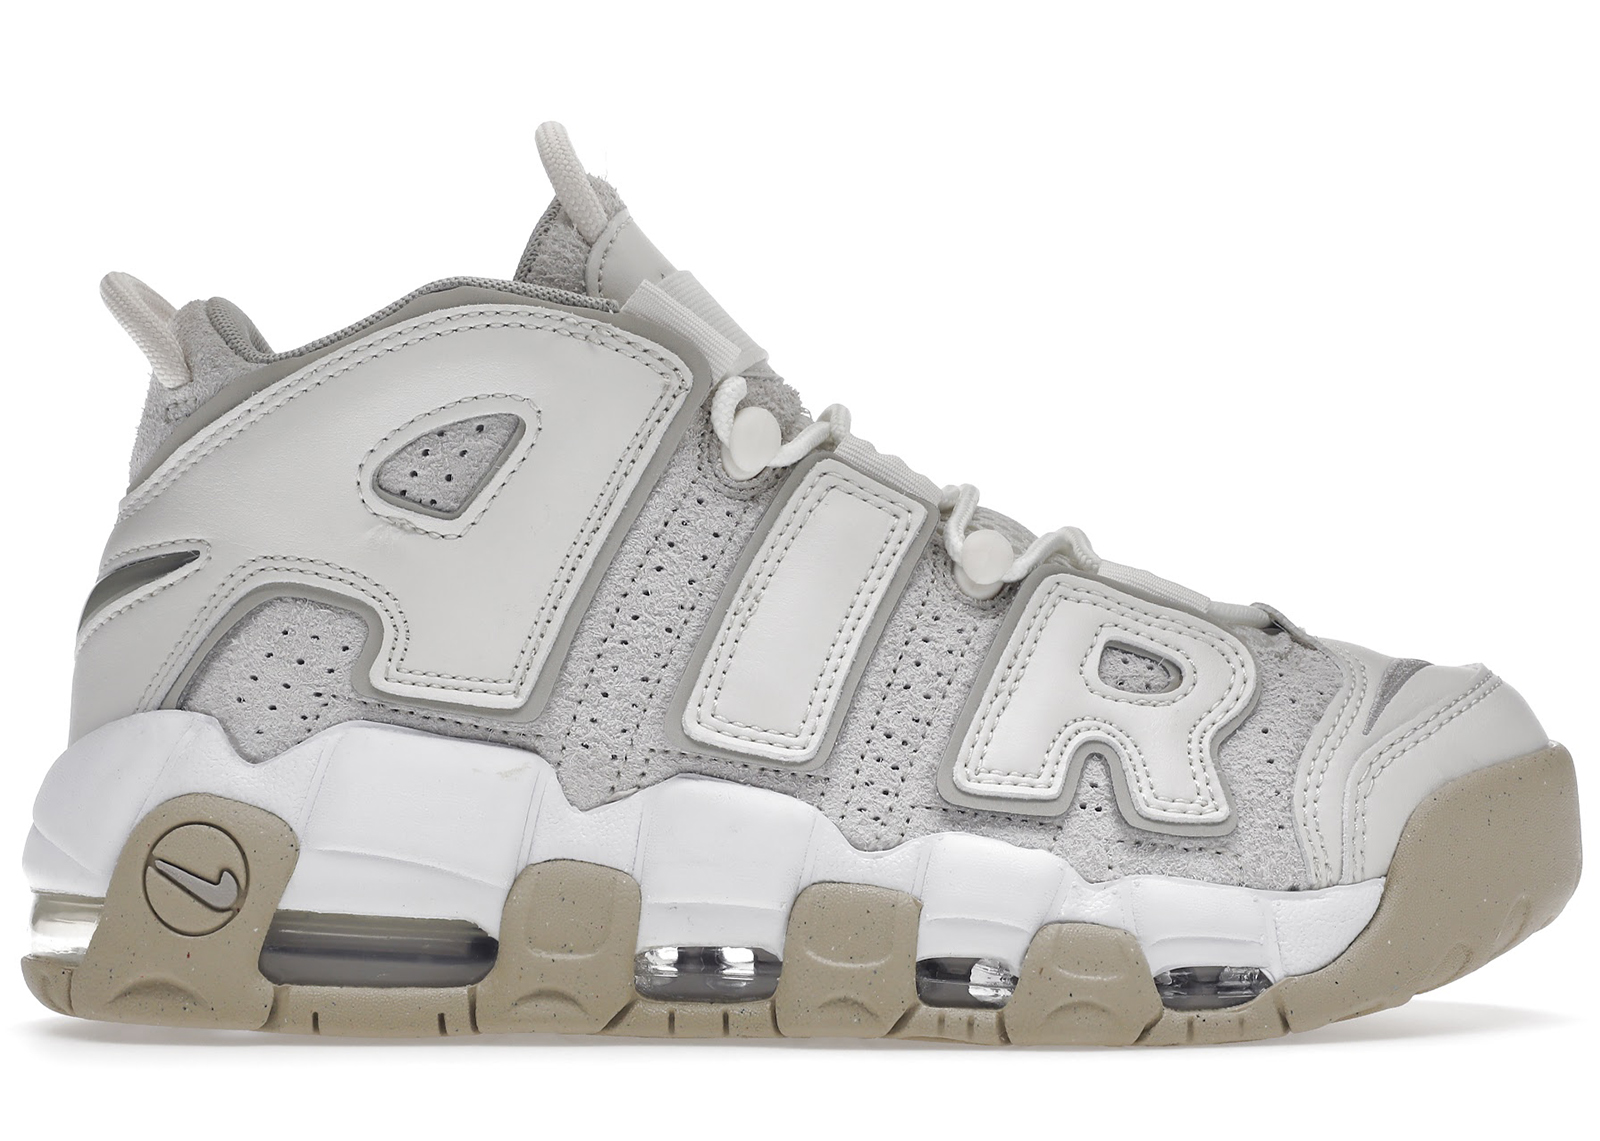 Buy Nike Basketball Air Uptempo Shoes & New Sneakers - StockX